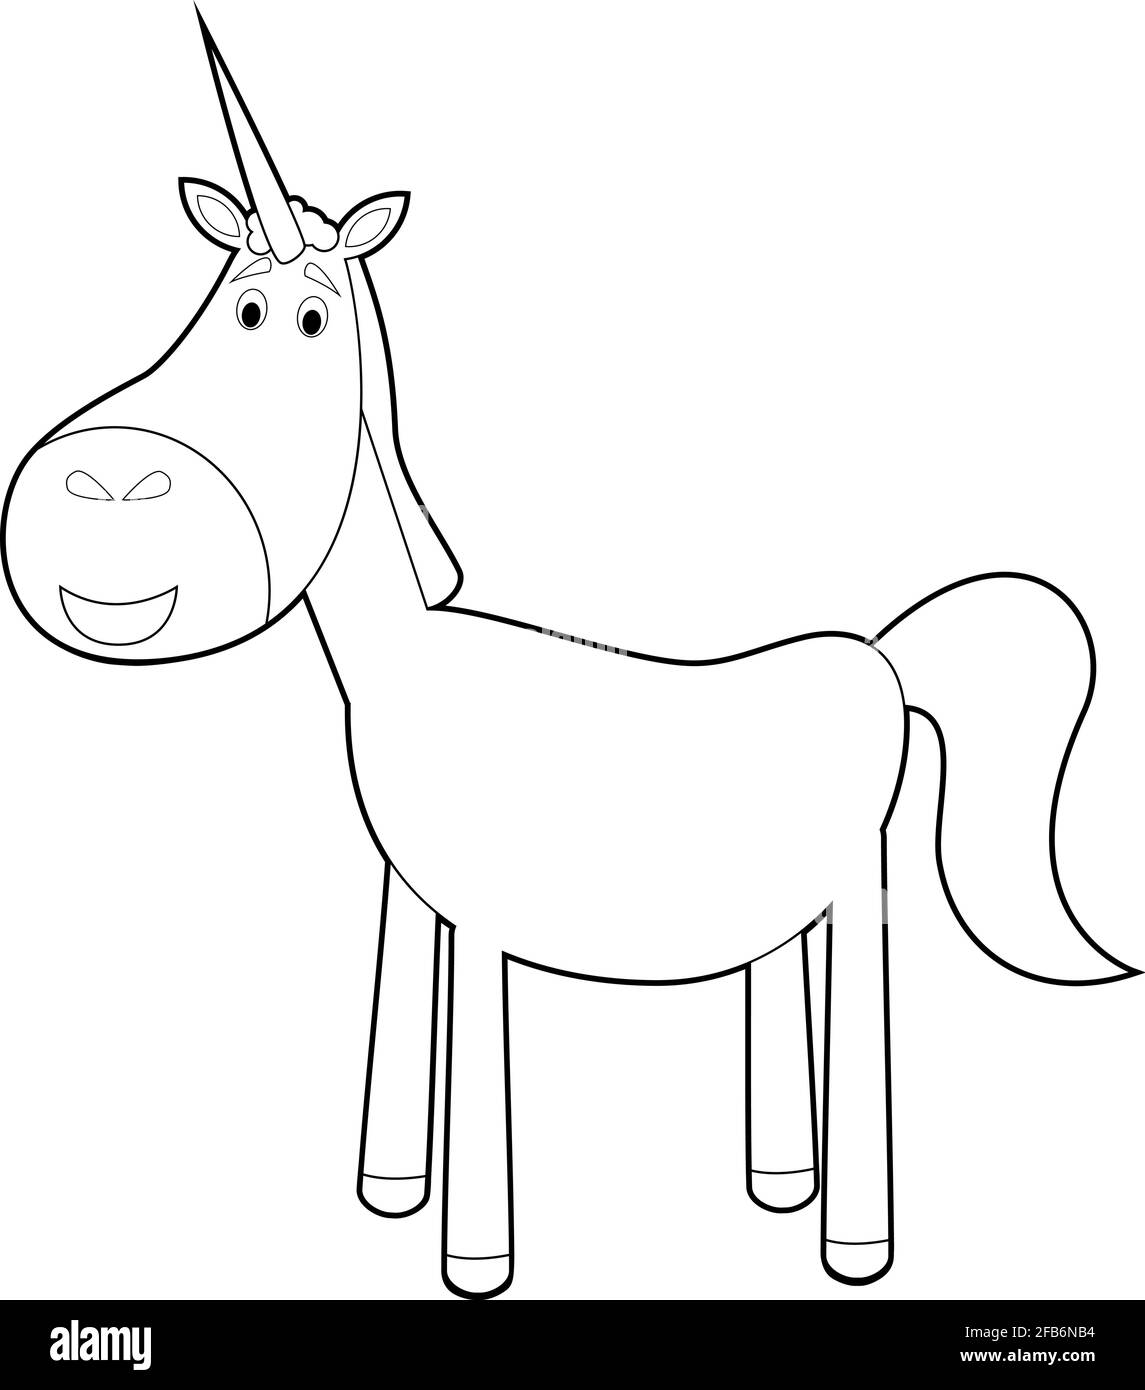 Easy Coloring drawings of animals for little kids: Unicorn Stock Vector